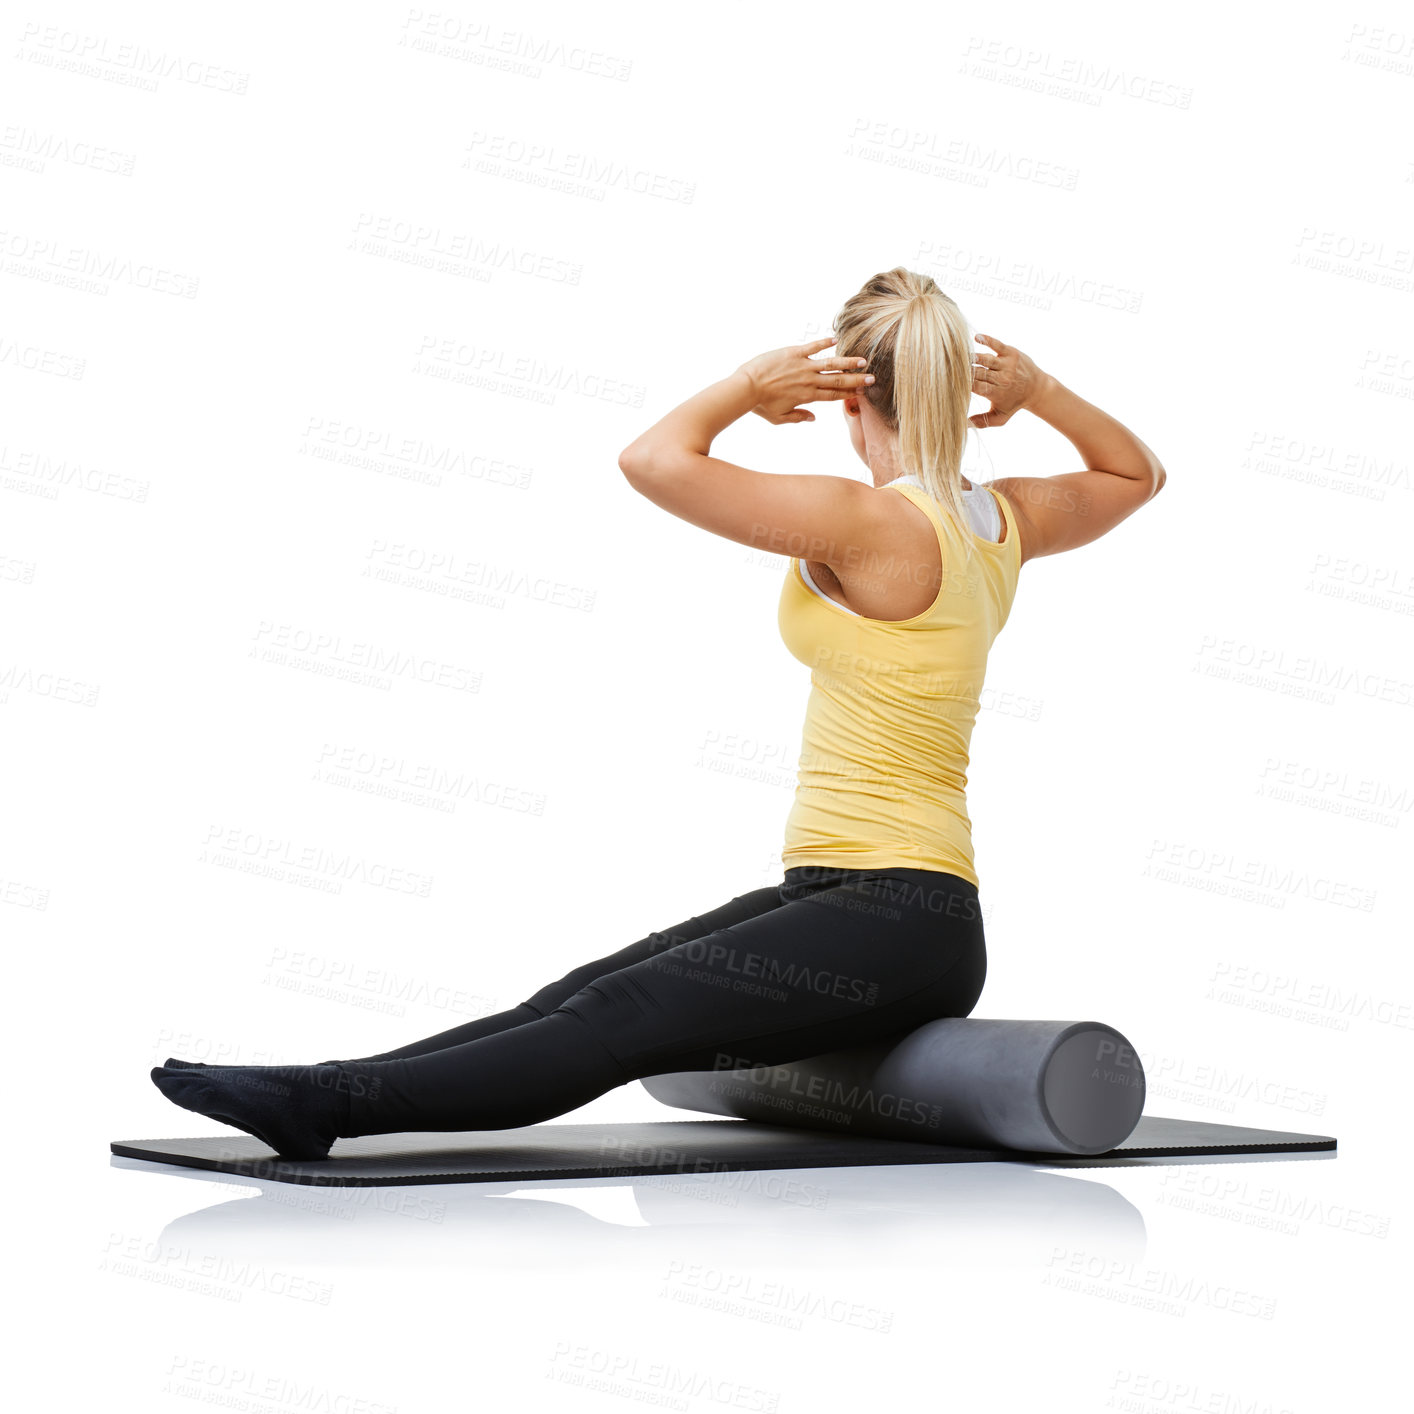 Buy stock photo Yoga fitness, foam roller and person stretching back for spine posture training, wellness challenge or active performance. Studio floor, exercise mat and athlete physical activity on white background